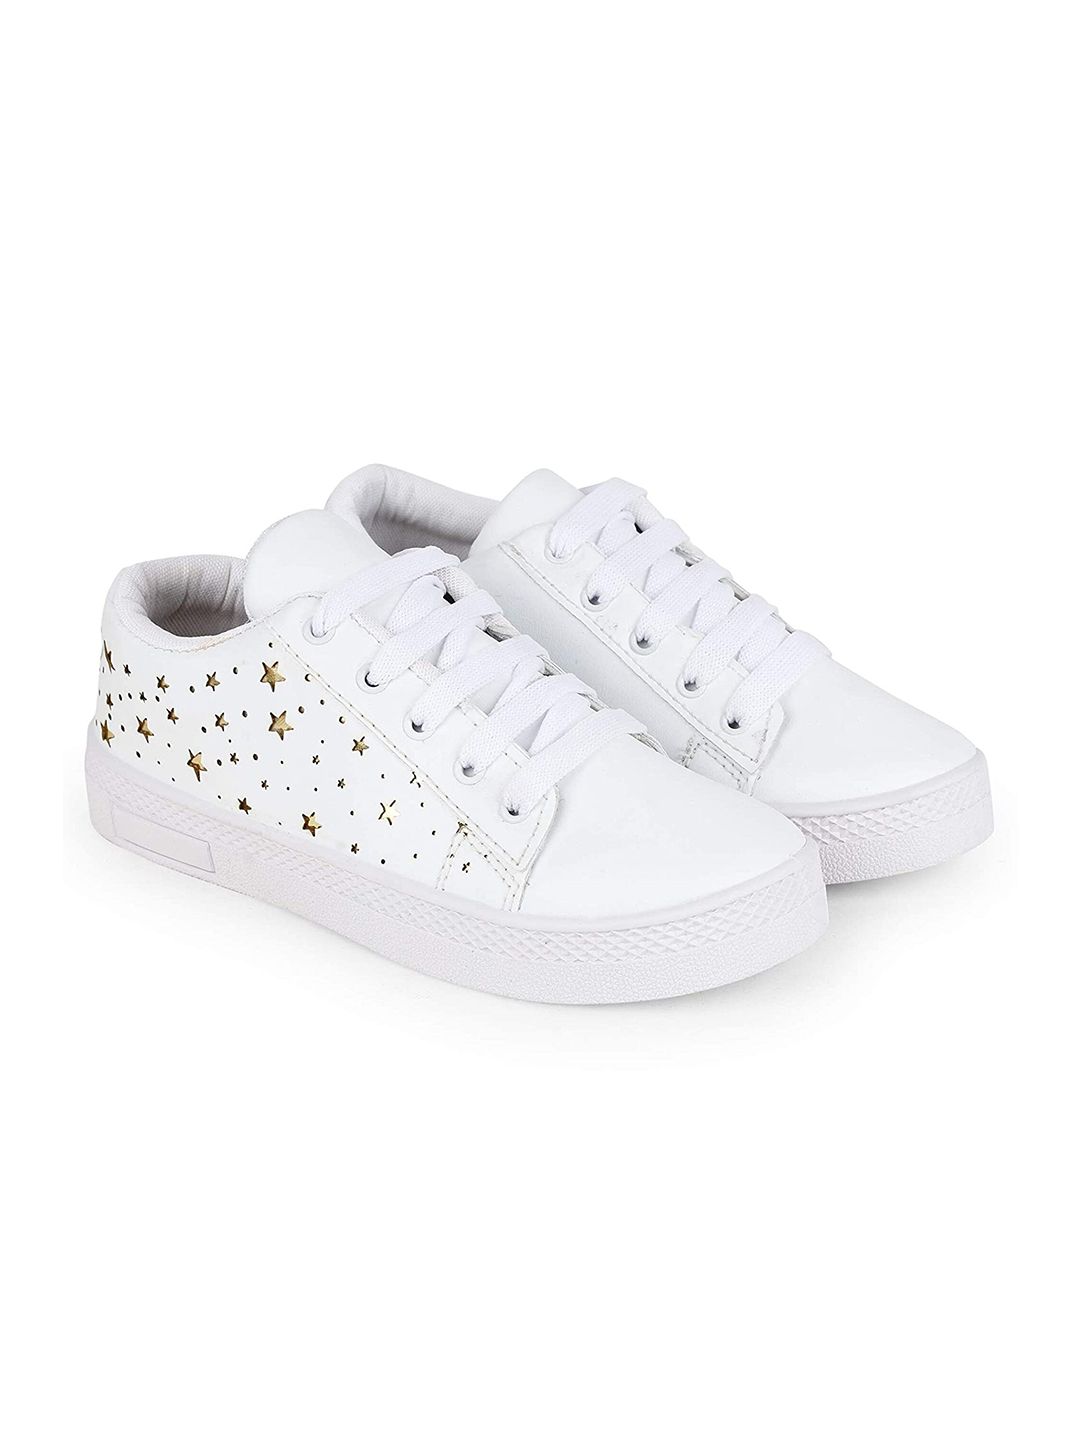 BEONZA Women White Striped Sneakers Price in India